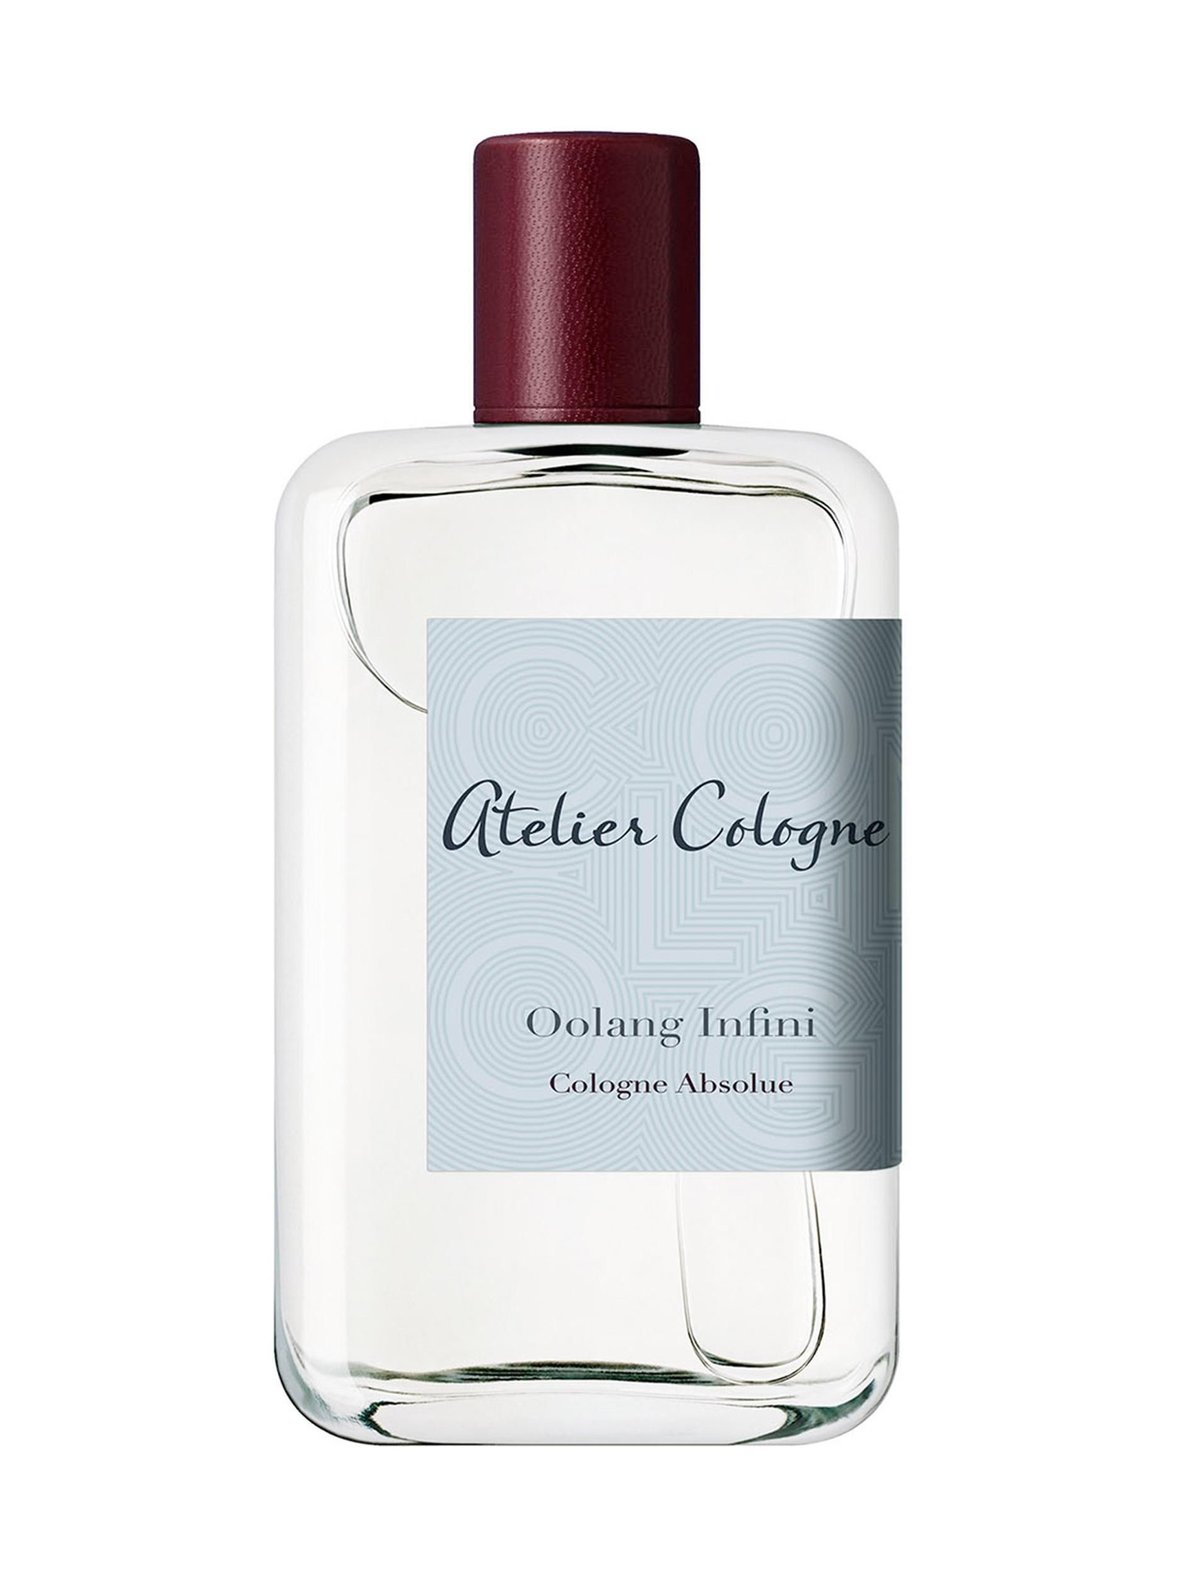 Oolang Infini Cologne Absolue -tuoksu, Atelier Cologne